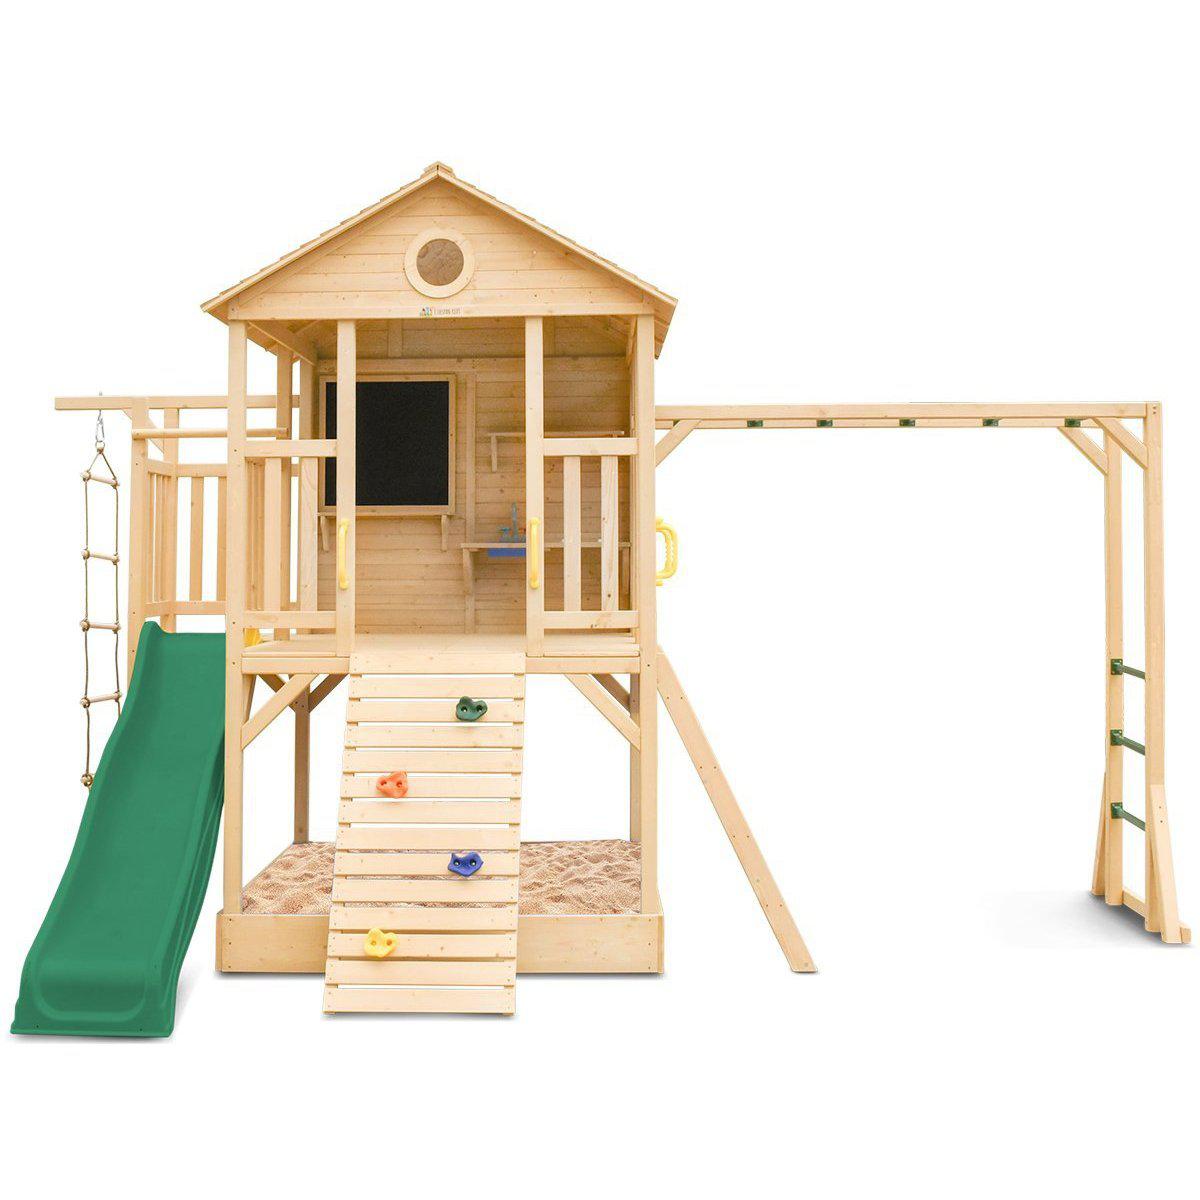 Kingston Cubby House: Adventure Awaits with Green Slide - Shop